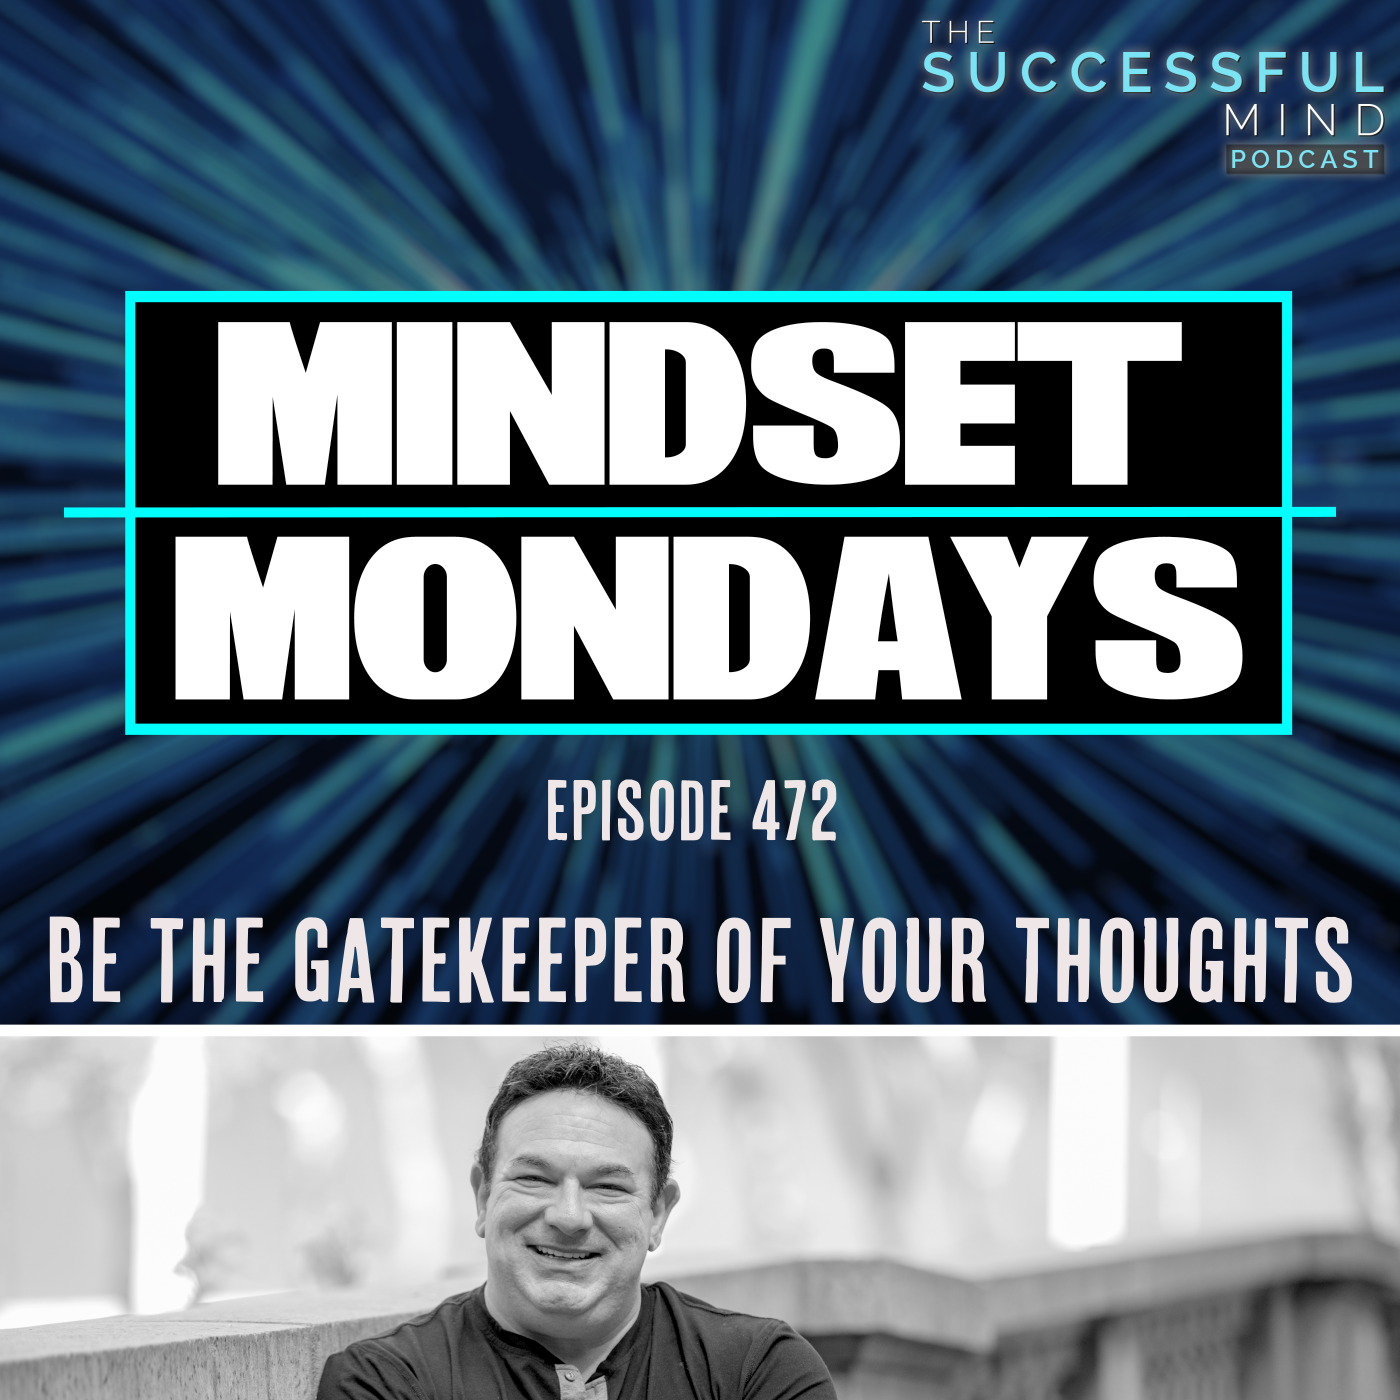 The Successful Mind Podcast - Episode 472 - Be the Gatekeeper of Your Thoughts